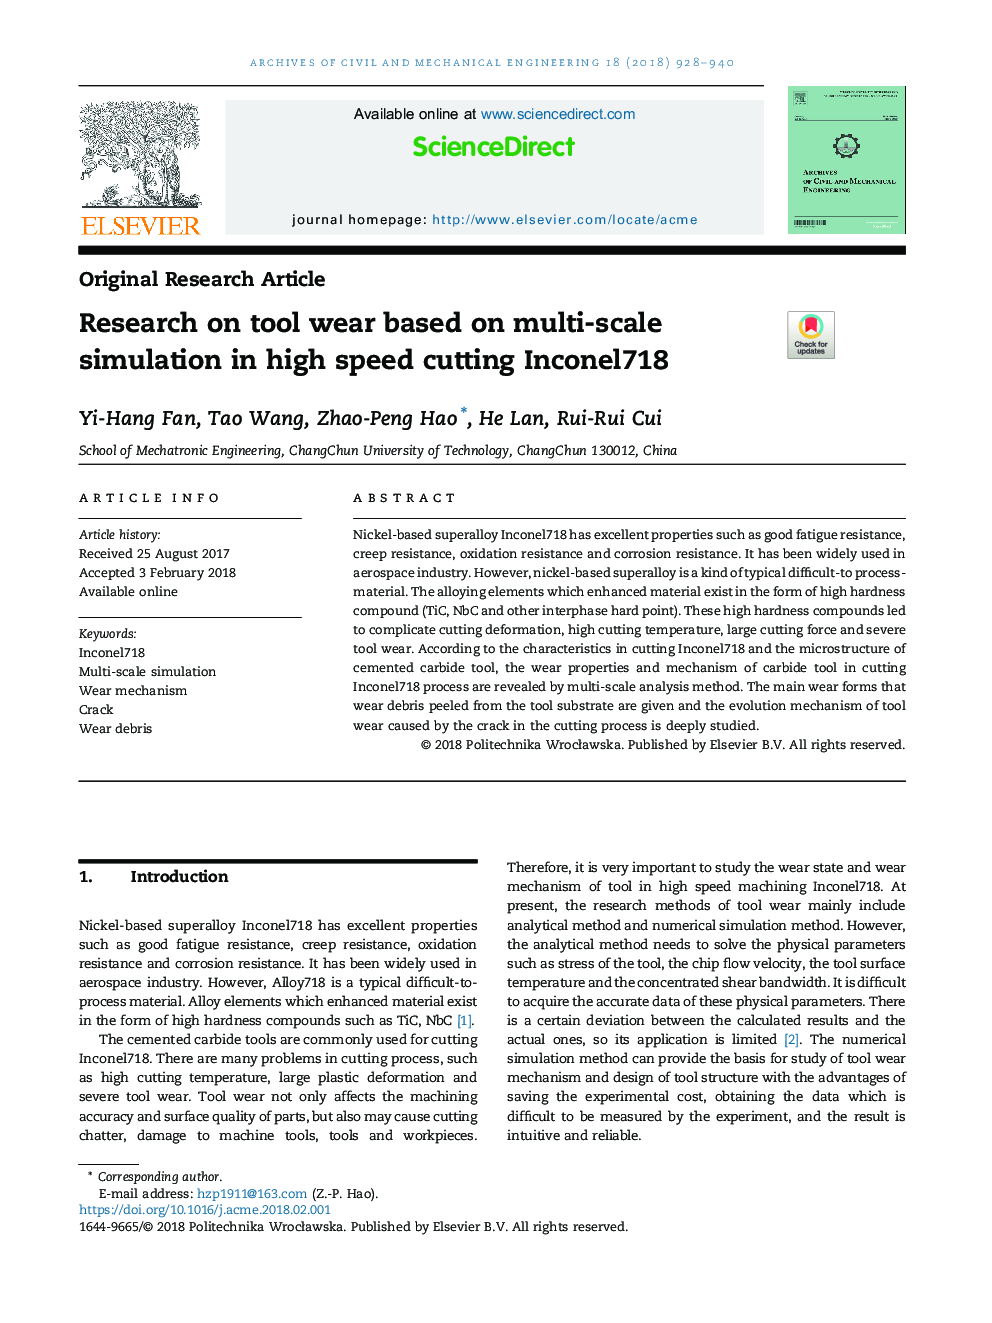 Research on tool wear based on multi-scale simulation in high speed cutting Inconel718